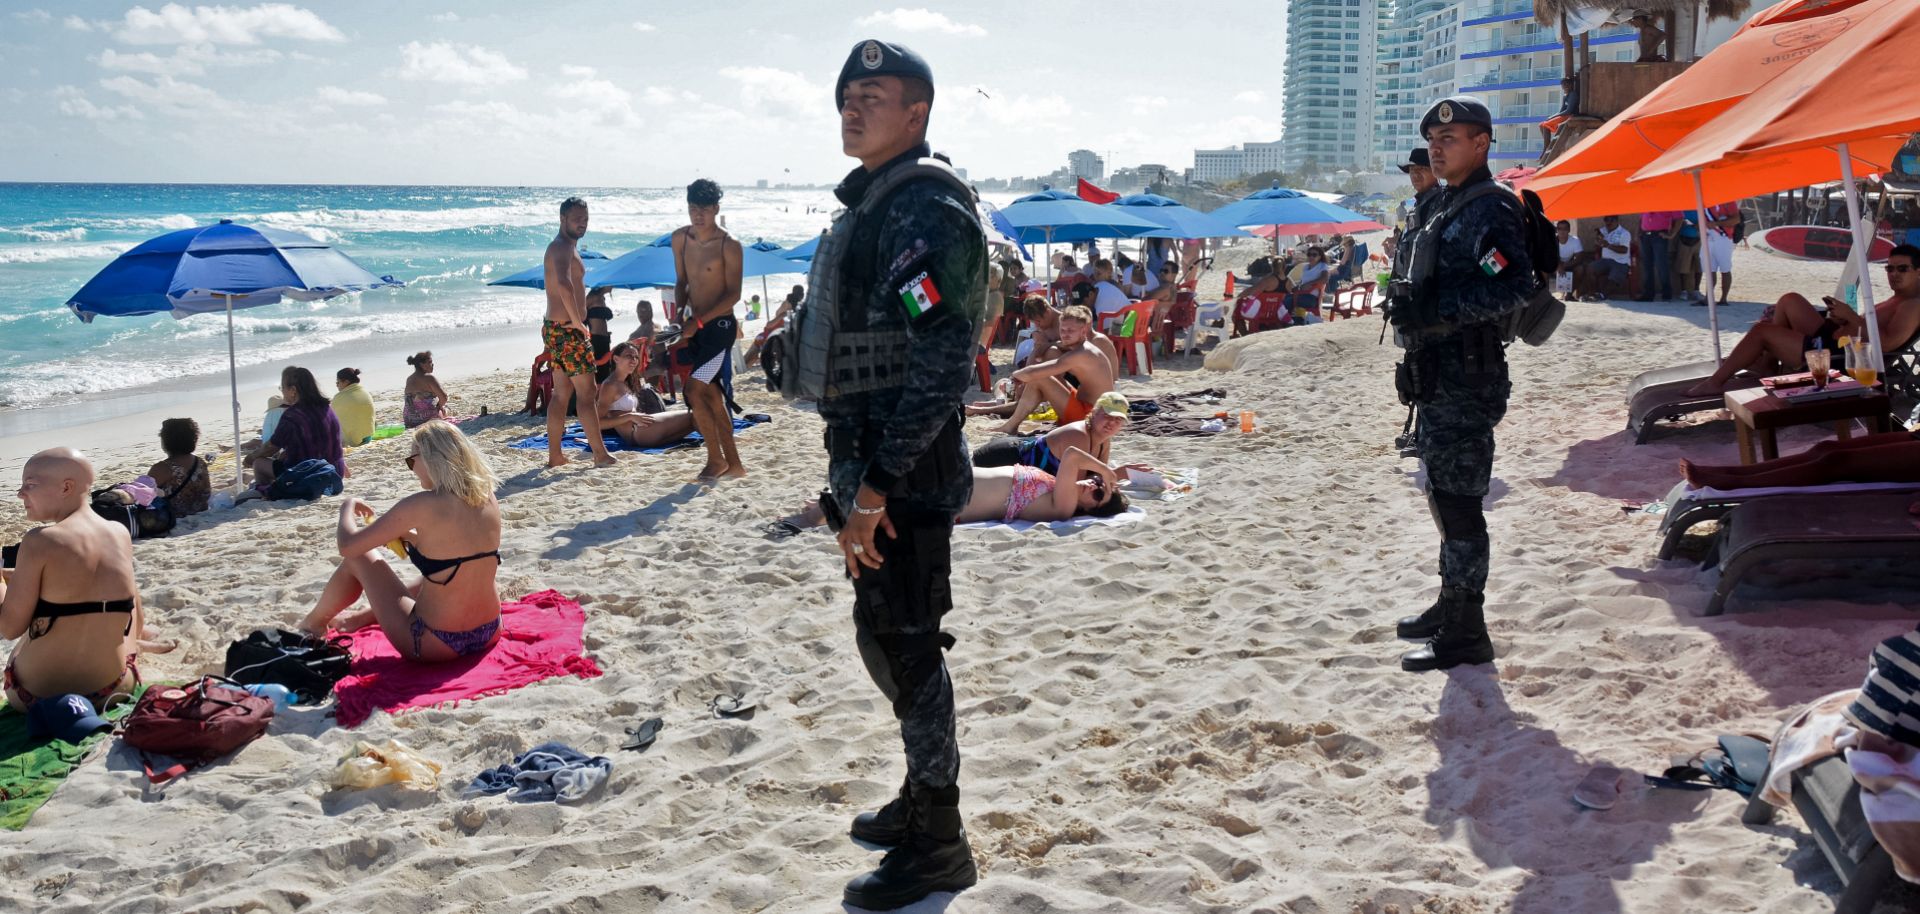 Mexican federal police patrol the beach in Cancun, a resort town rarely touched by violence. But recent drug cartel battle there have resulted in spillover violence that left some tourists dead.